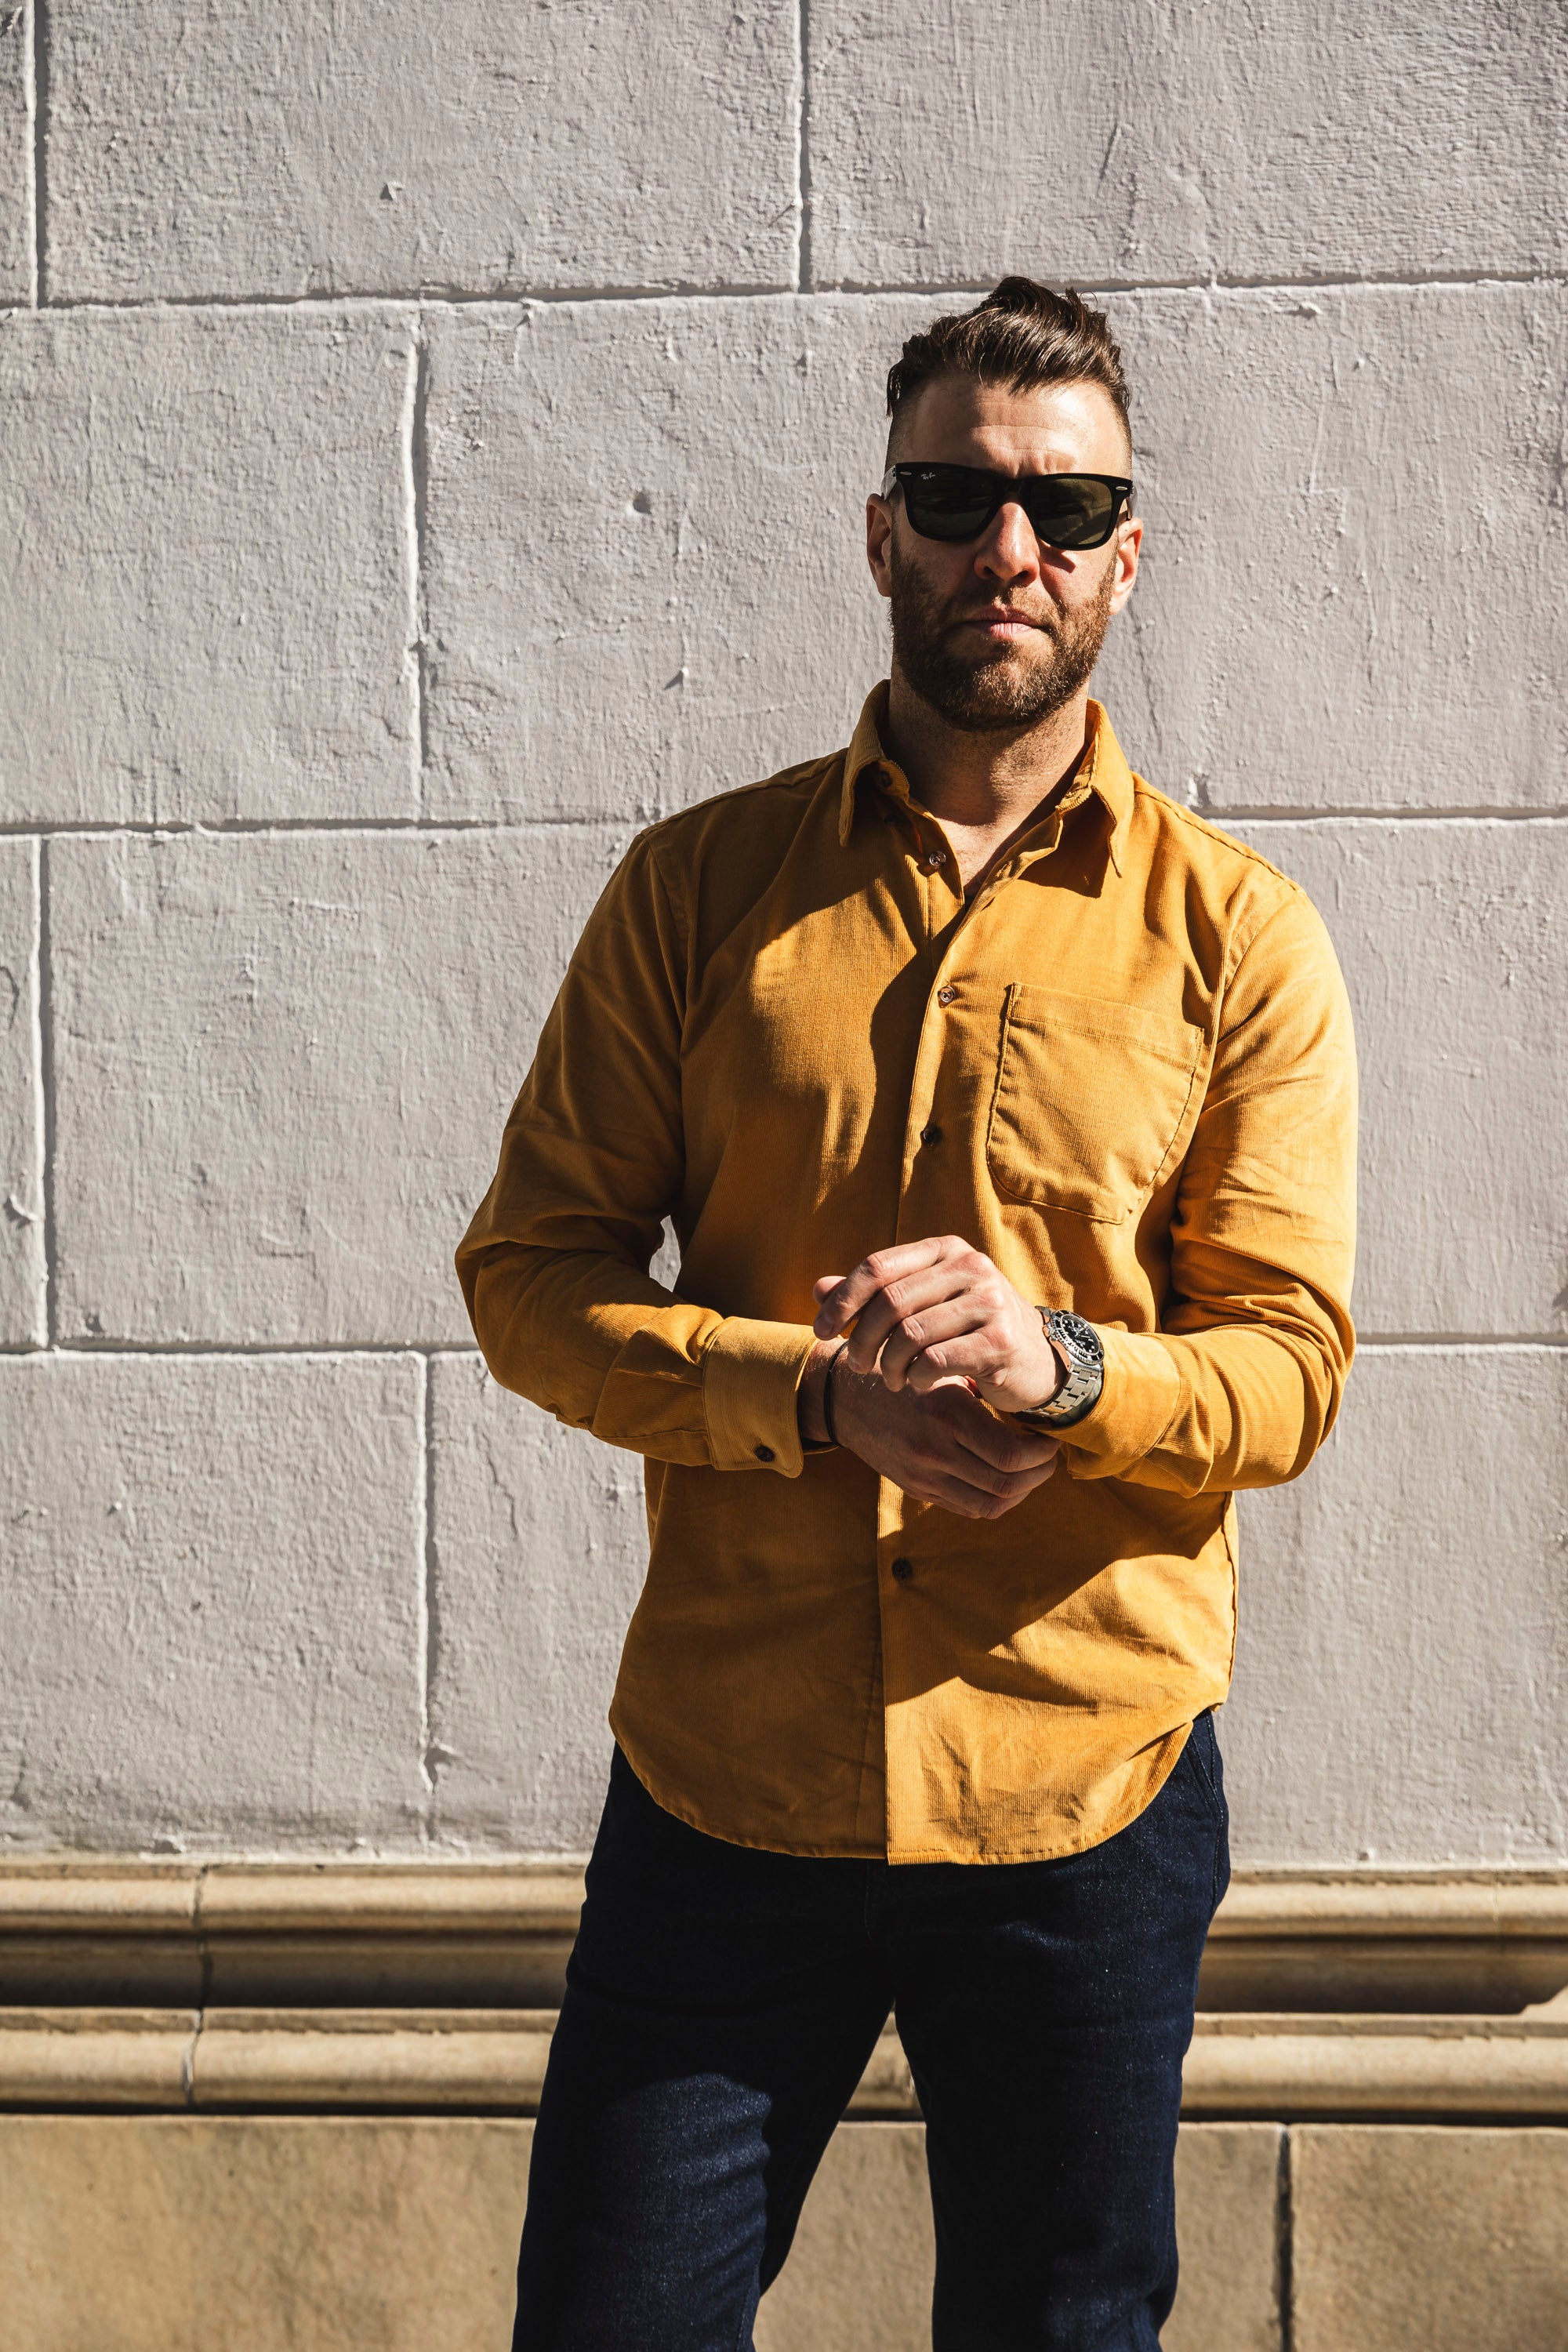 Naked & Famous - Easy Shirt - Cotton Dyed Corduroy - Golden Brown